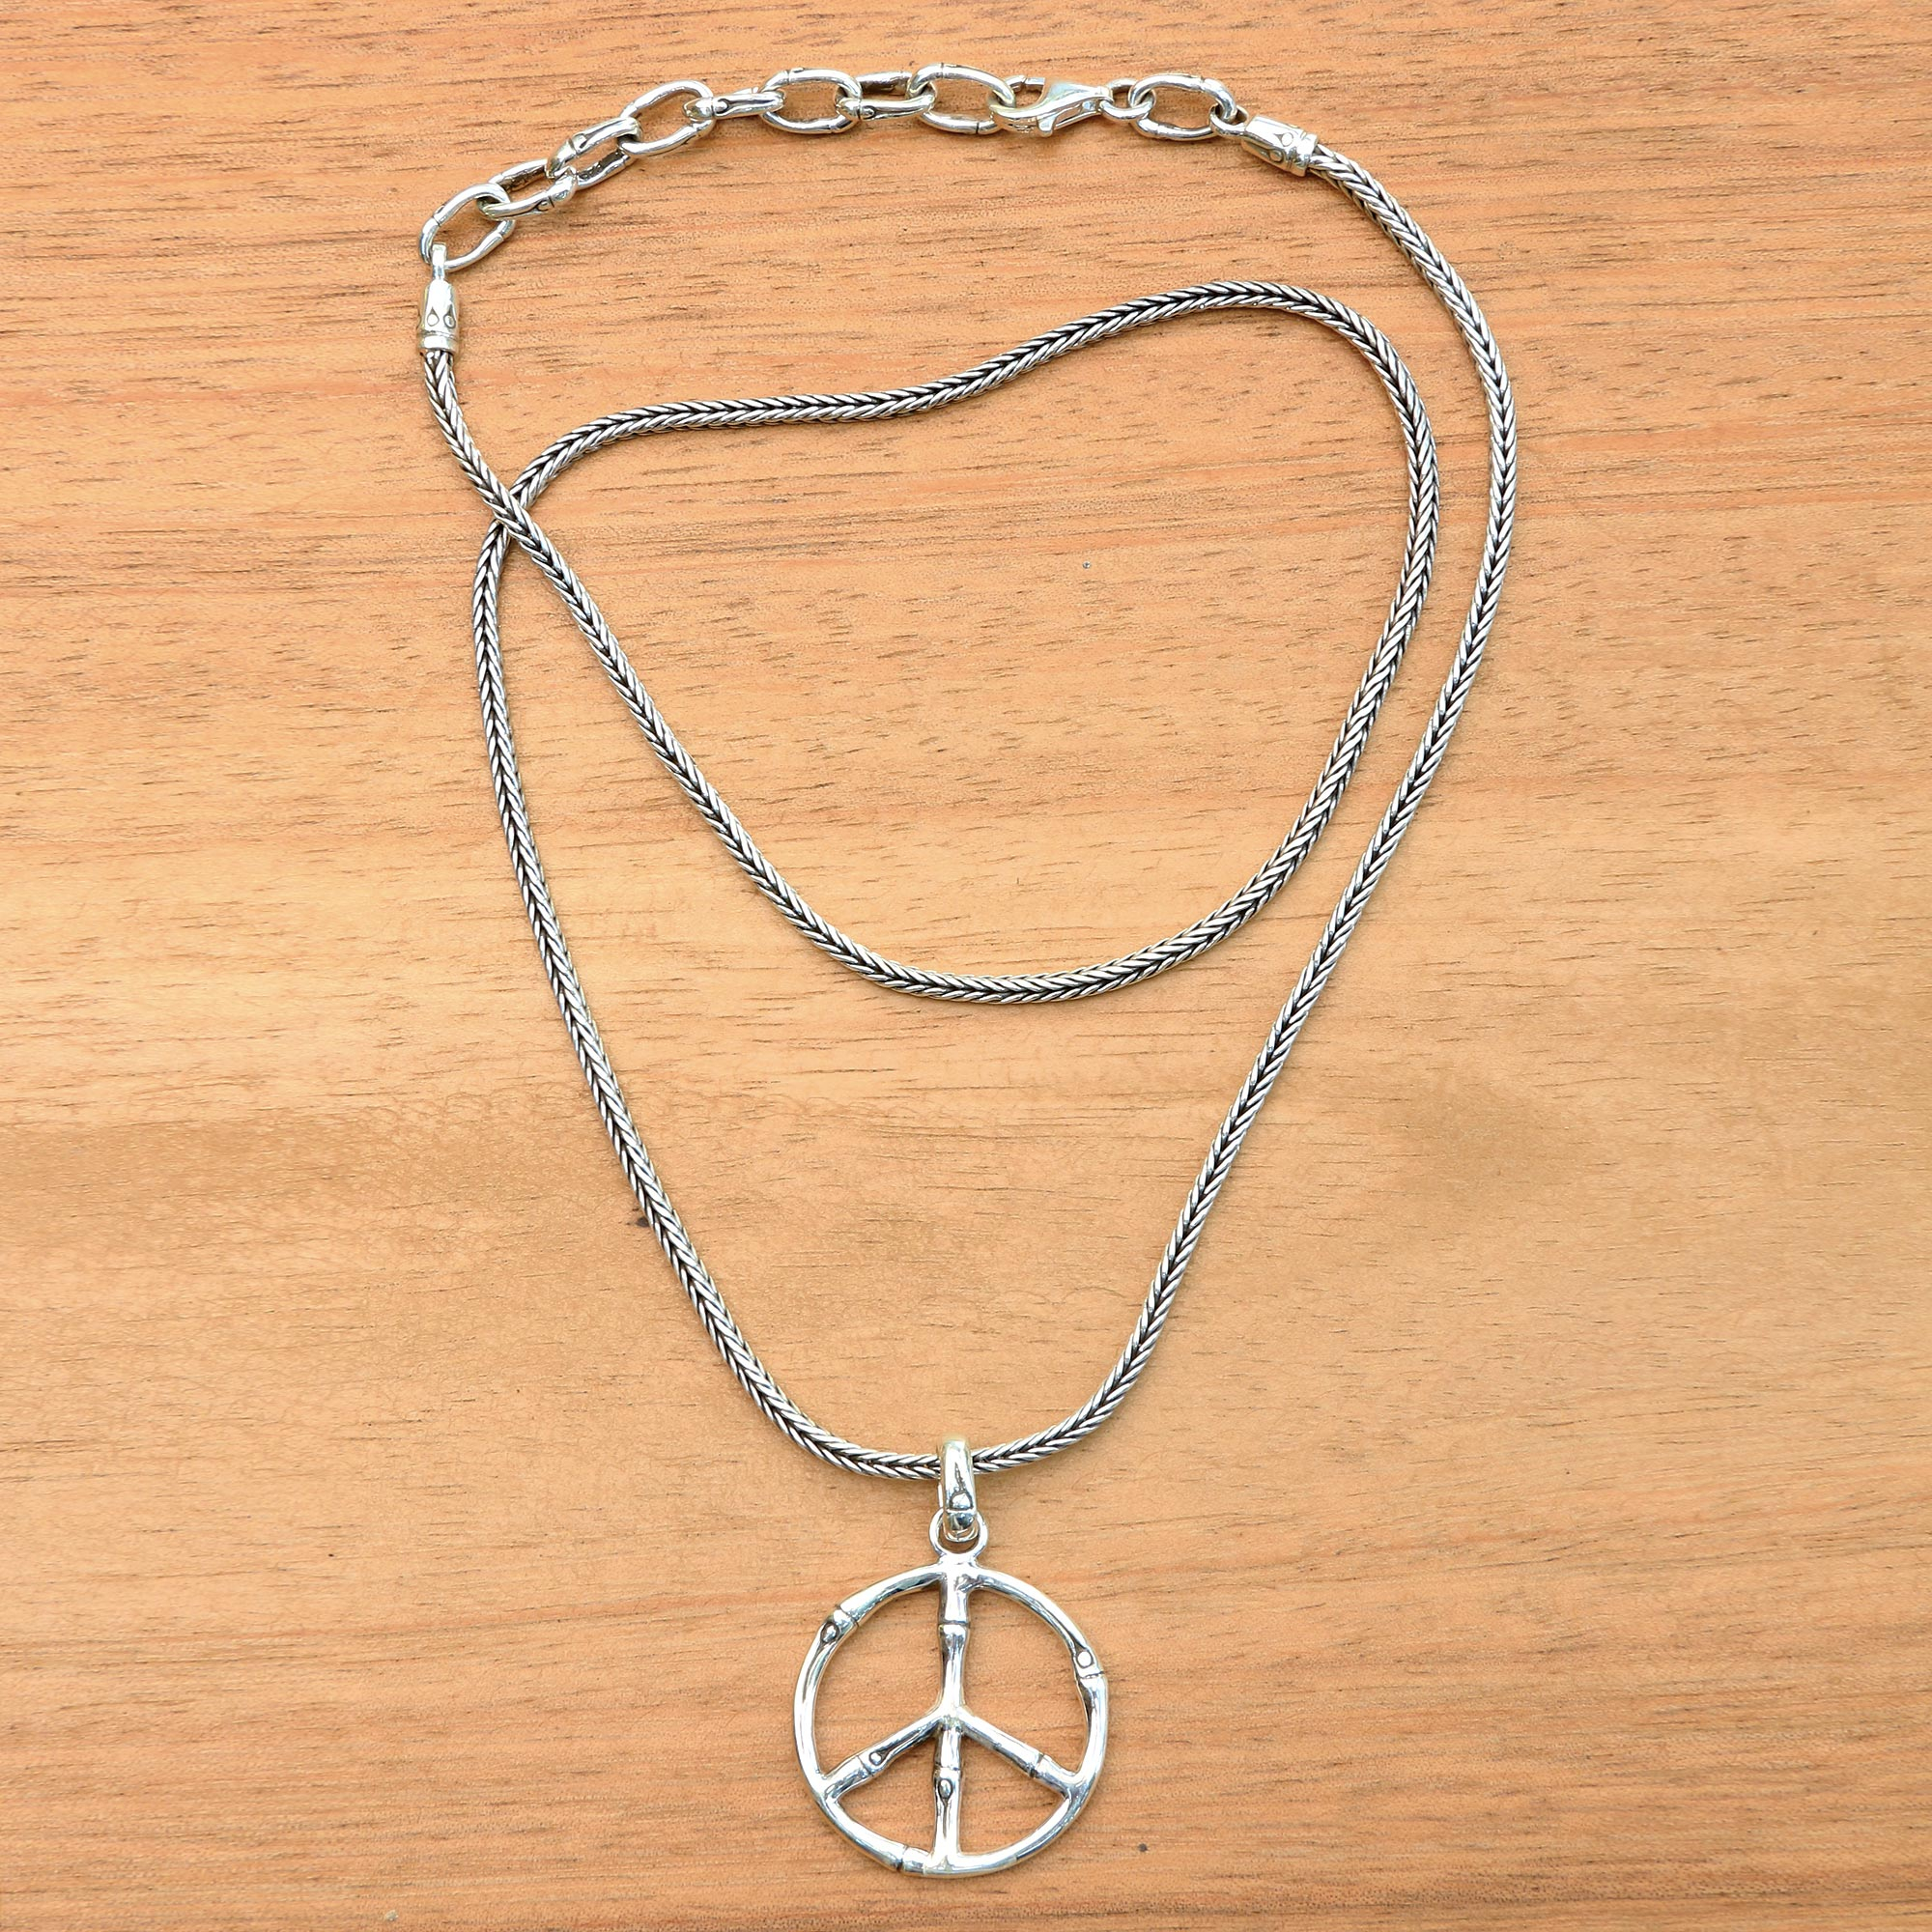 1 Stainless Steel Peace Sign Pendant Leather Lace Necklace 1" Wide 